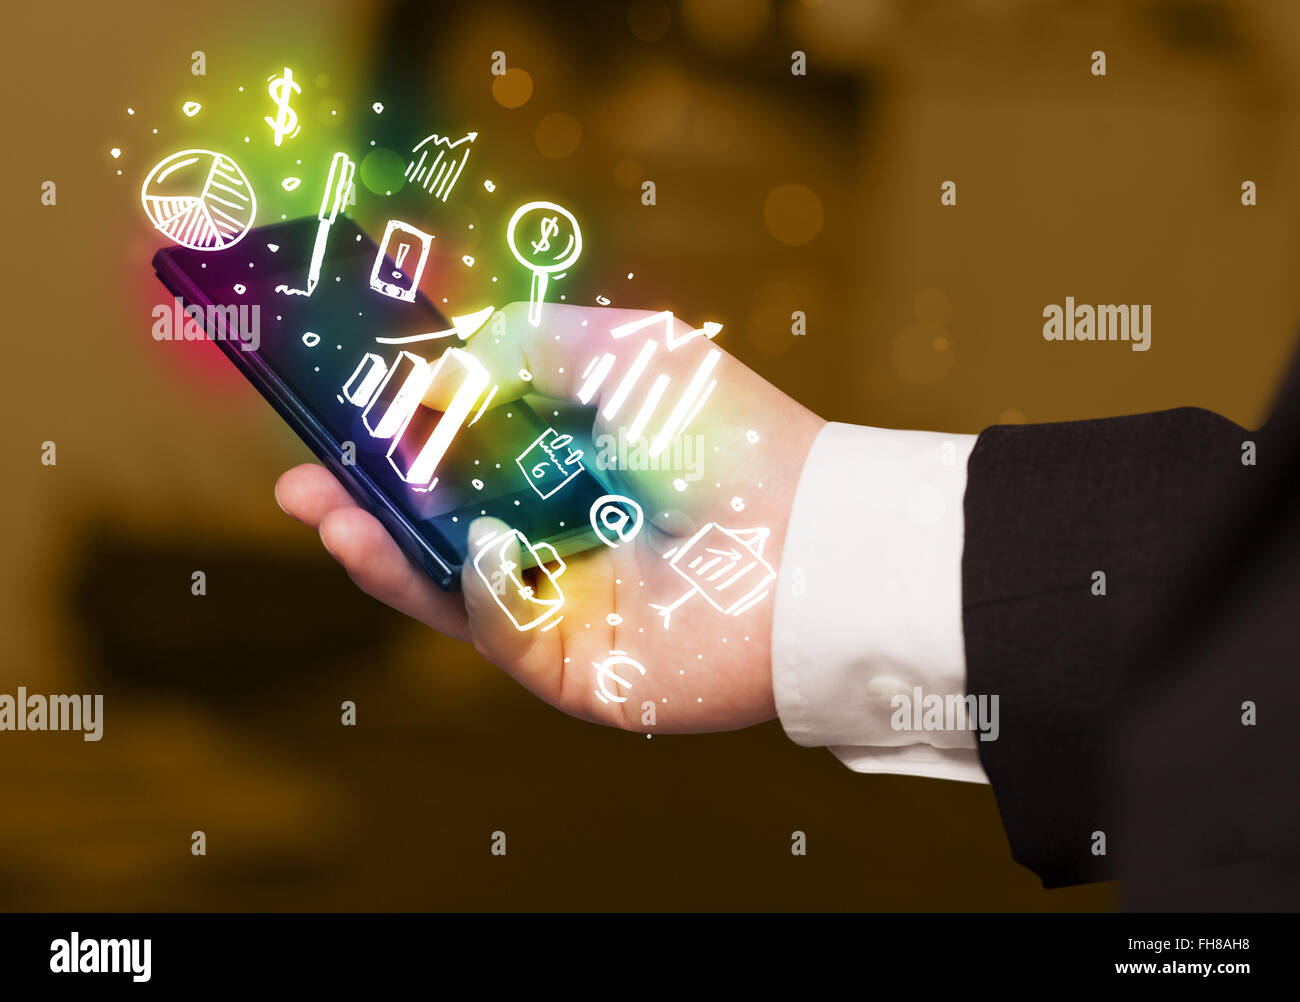 Smartphone with finance and market icons and symbols Stock Photo